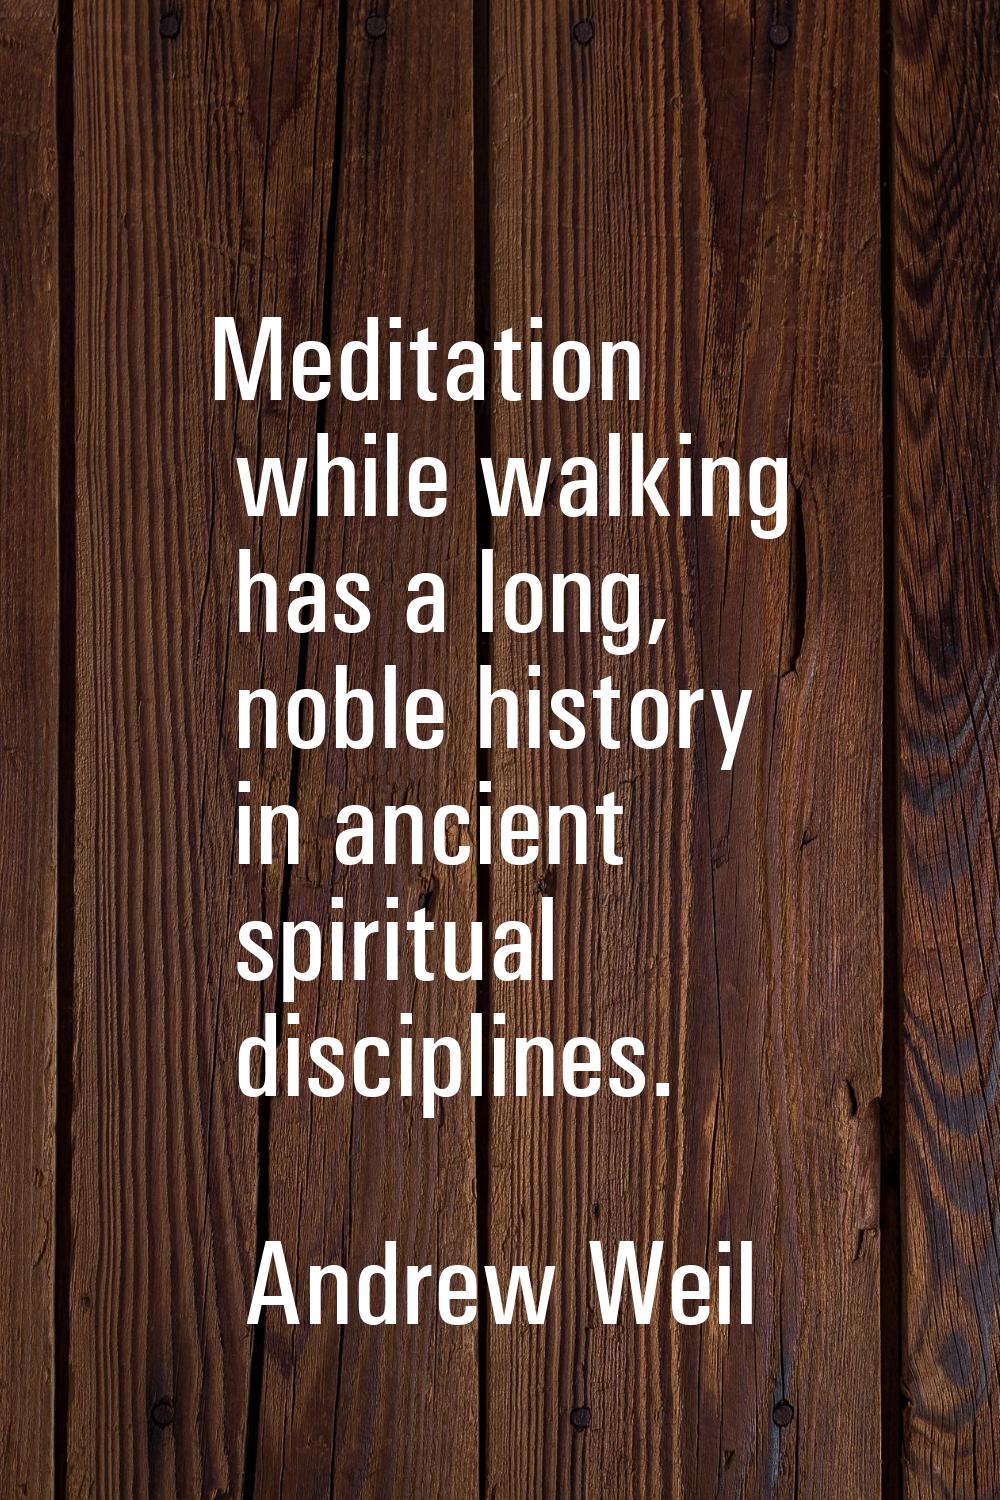 Meditation while walking has a long, noble history in ancient spiritual disciplines.